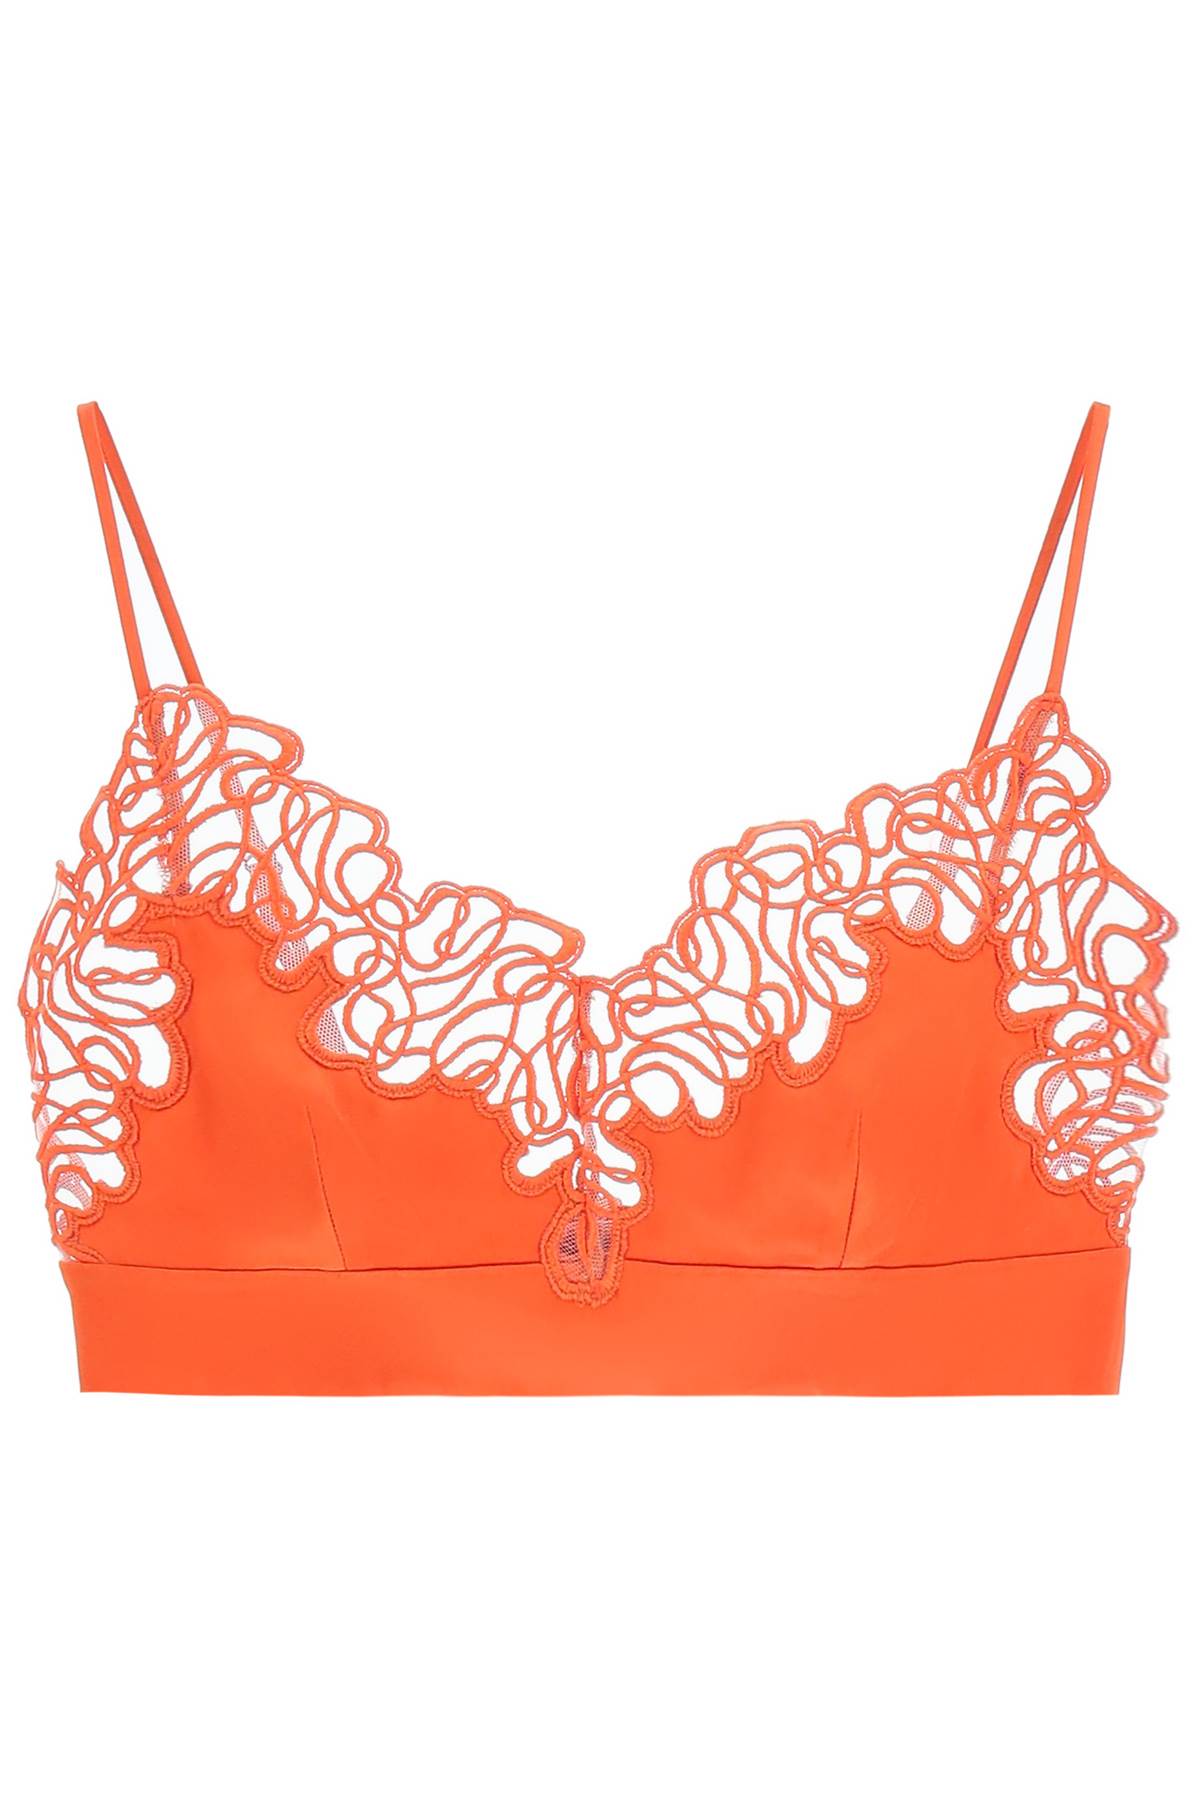 Stella McCartney Satin And Lace Bralette Top